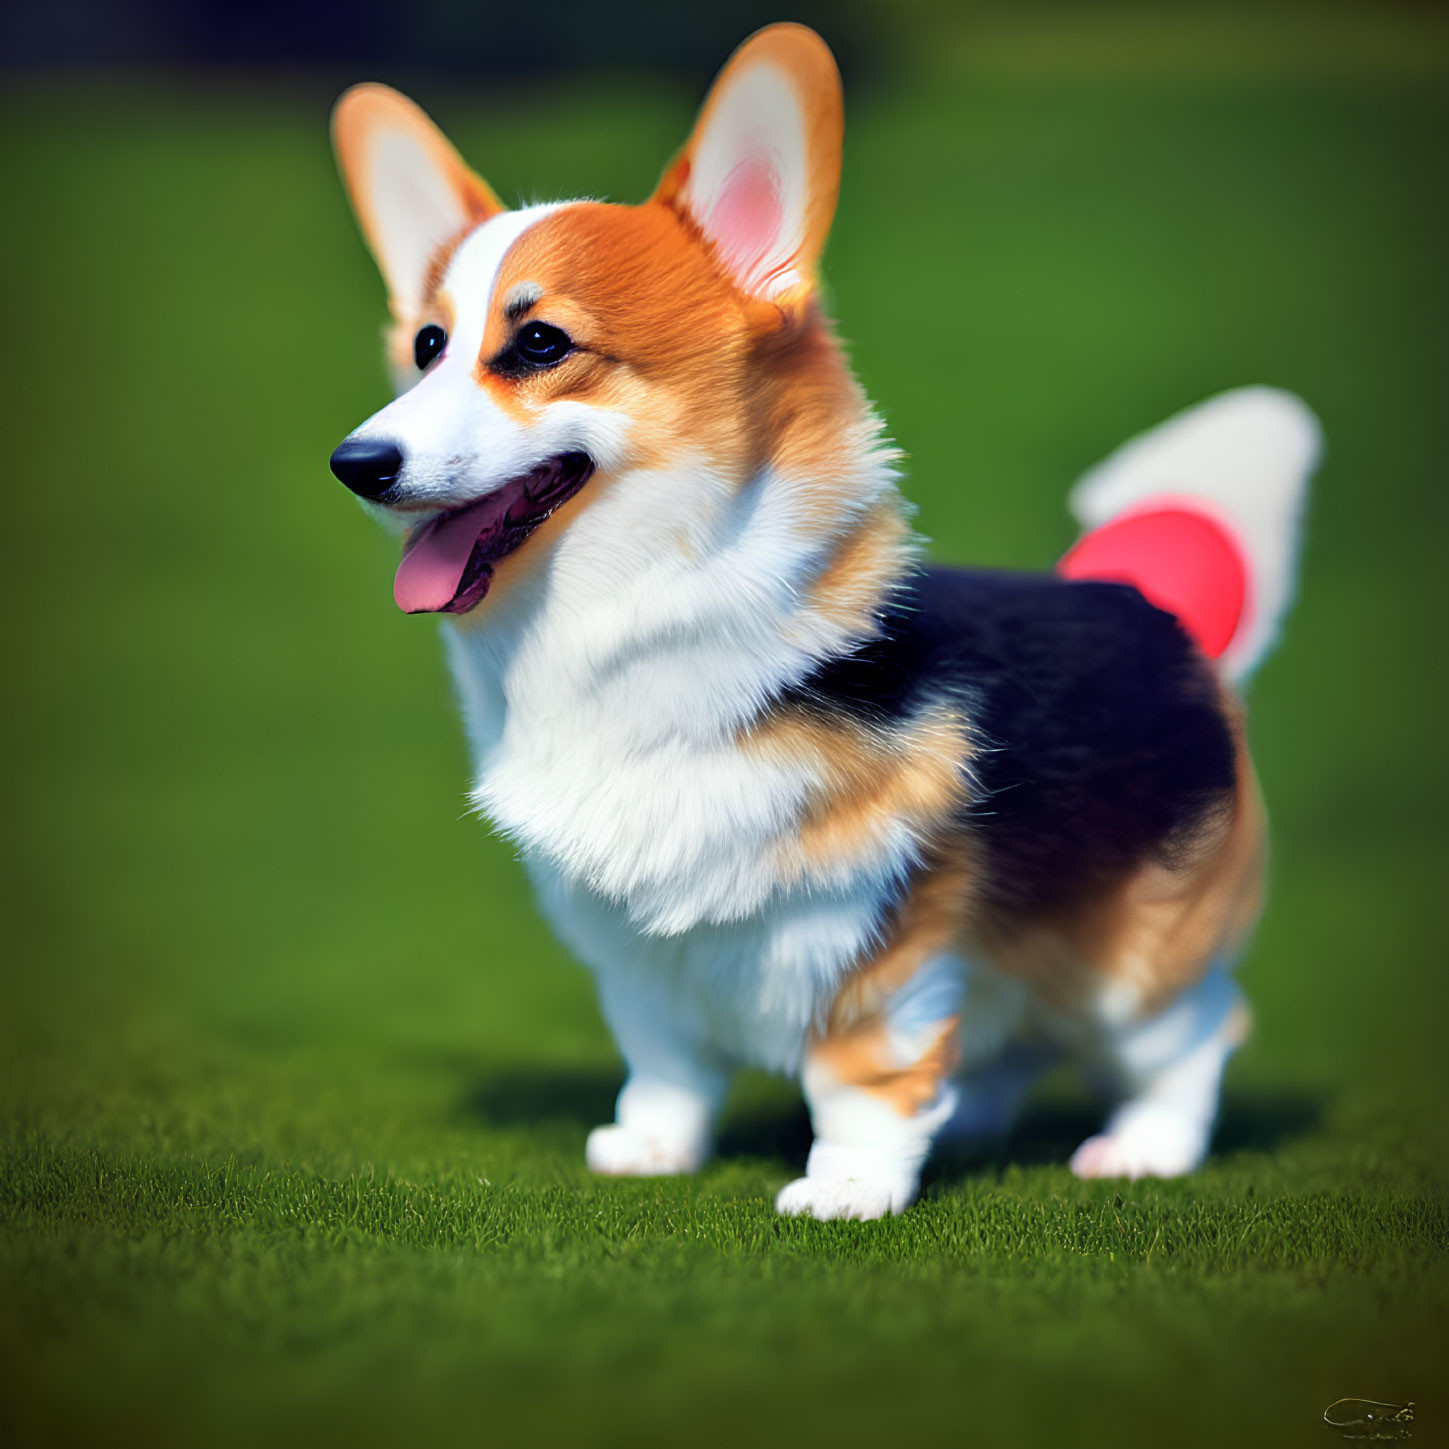 Fluffy Pembroke Welsh Corgi with white, brown, and black coat on grass